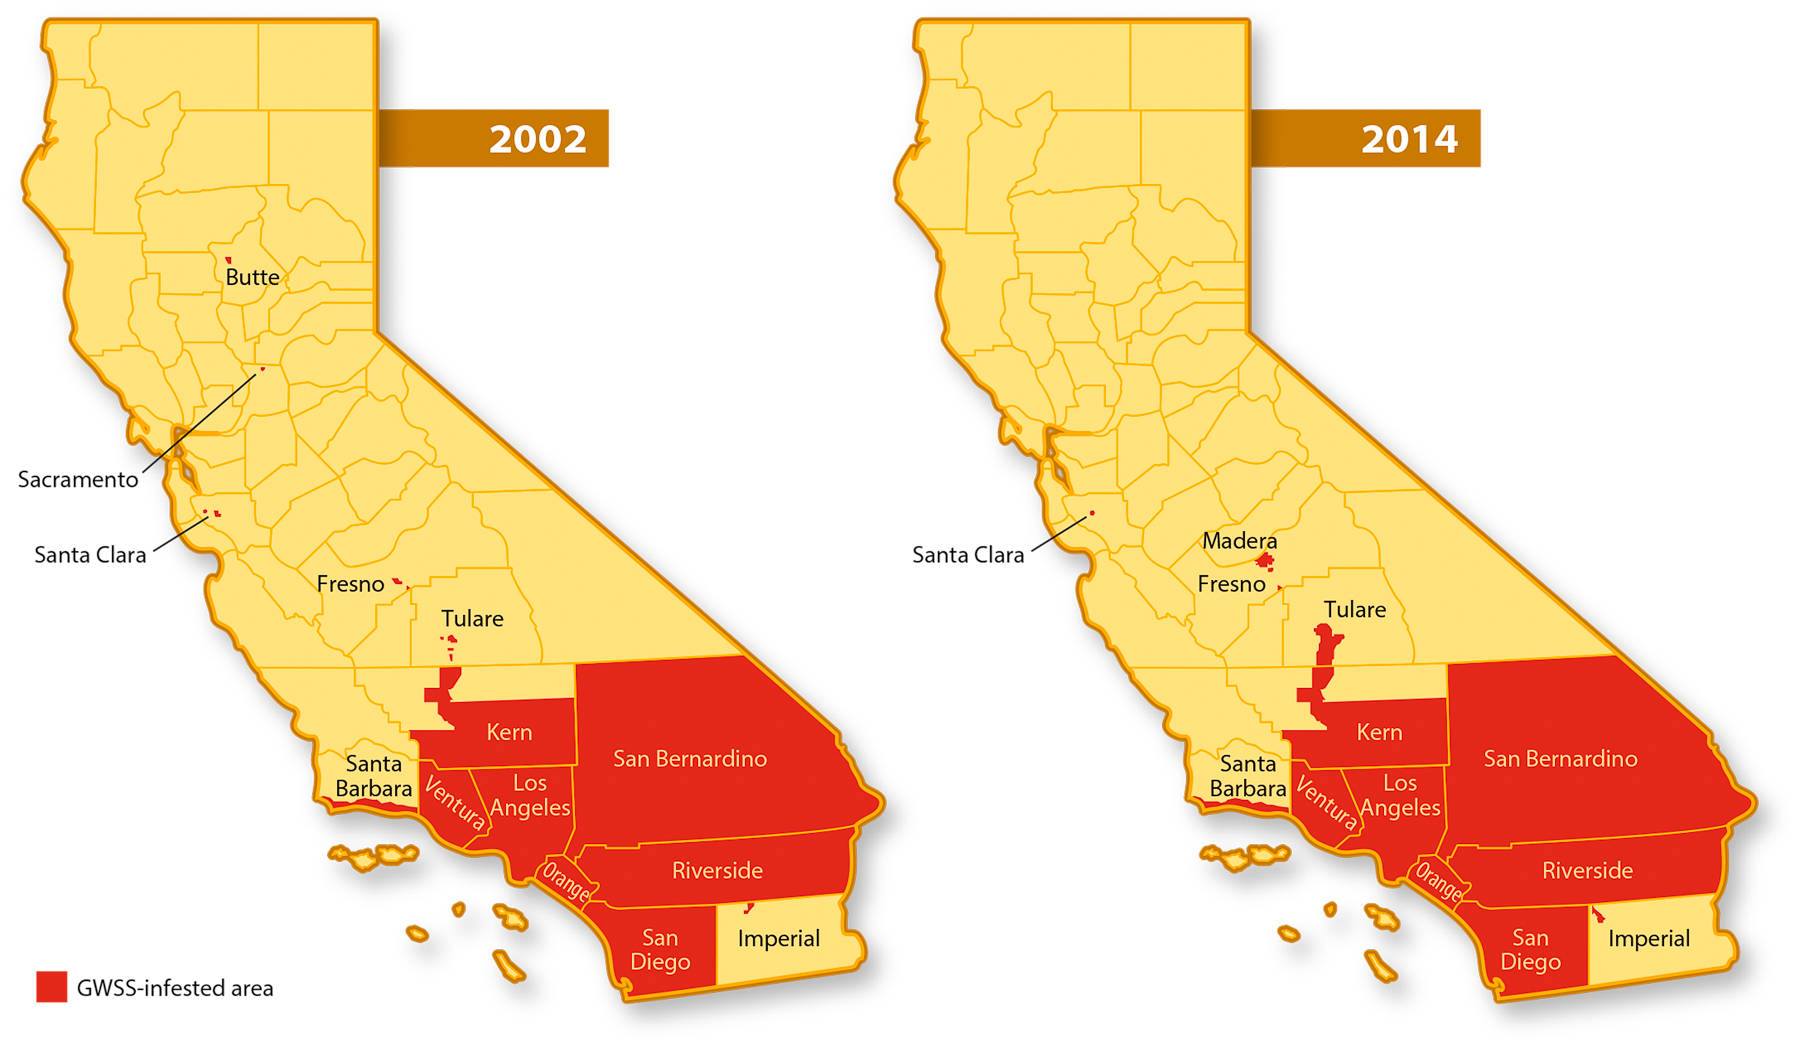 Areas of California infested by GWSS in 2002 and 2014. At the end of 2002, GWSS was confined mostly to Southern California counties, with minor infestations in three Northern California counties. The Southern California infestation in 2014 is slightly expanded compared to the infestation in 2002, but some Northern California infestations have been eradicated. Other infestation maps are available at cdfa.ca.gov/pdcp/map_index.html.